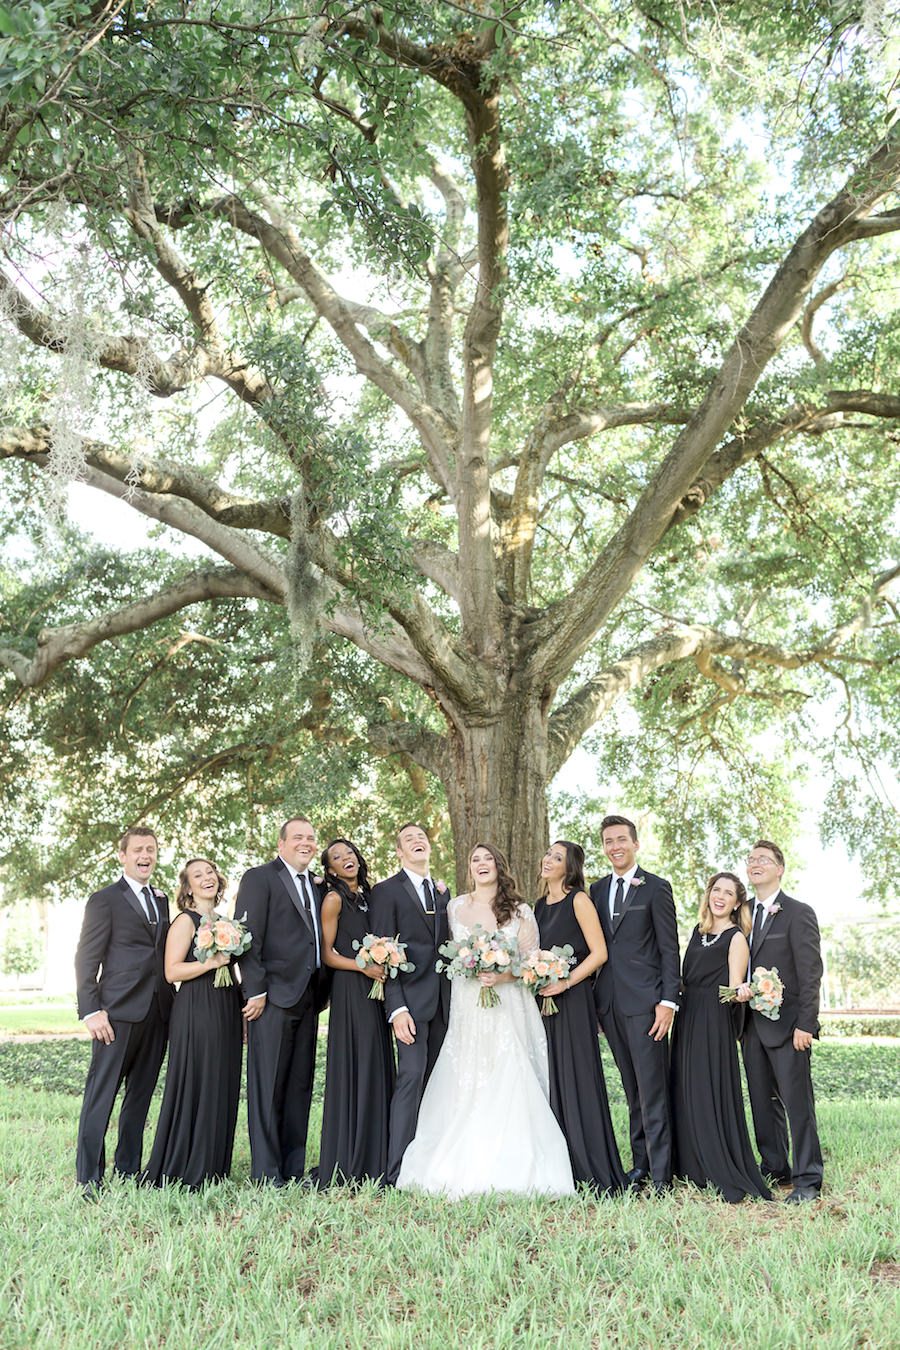 Outdoor Lakeland Wedding Party Portrait | Black Paper Crown Bridesmaids Dresses with Hayley Paige Wedding Gown